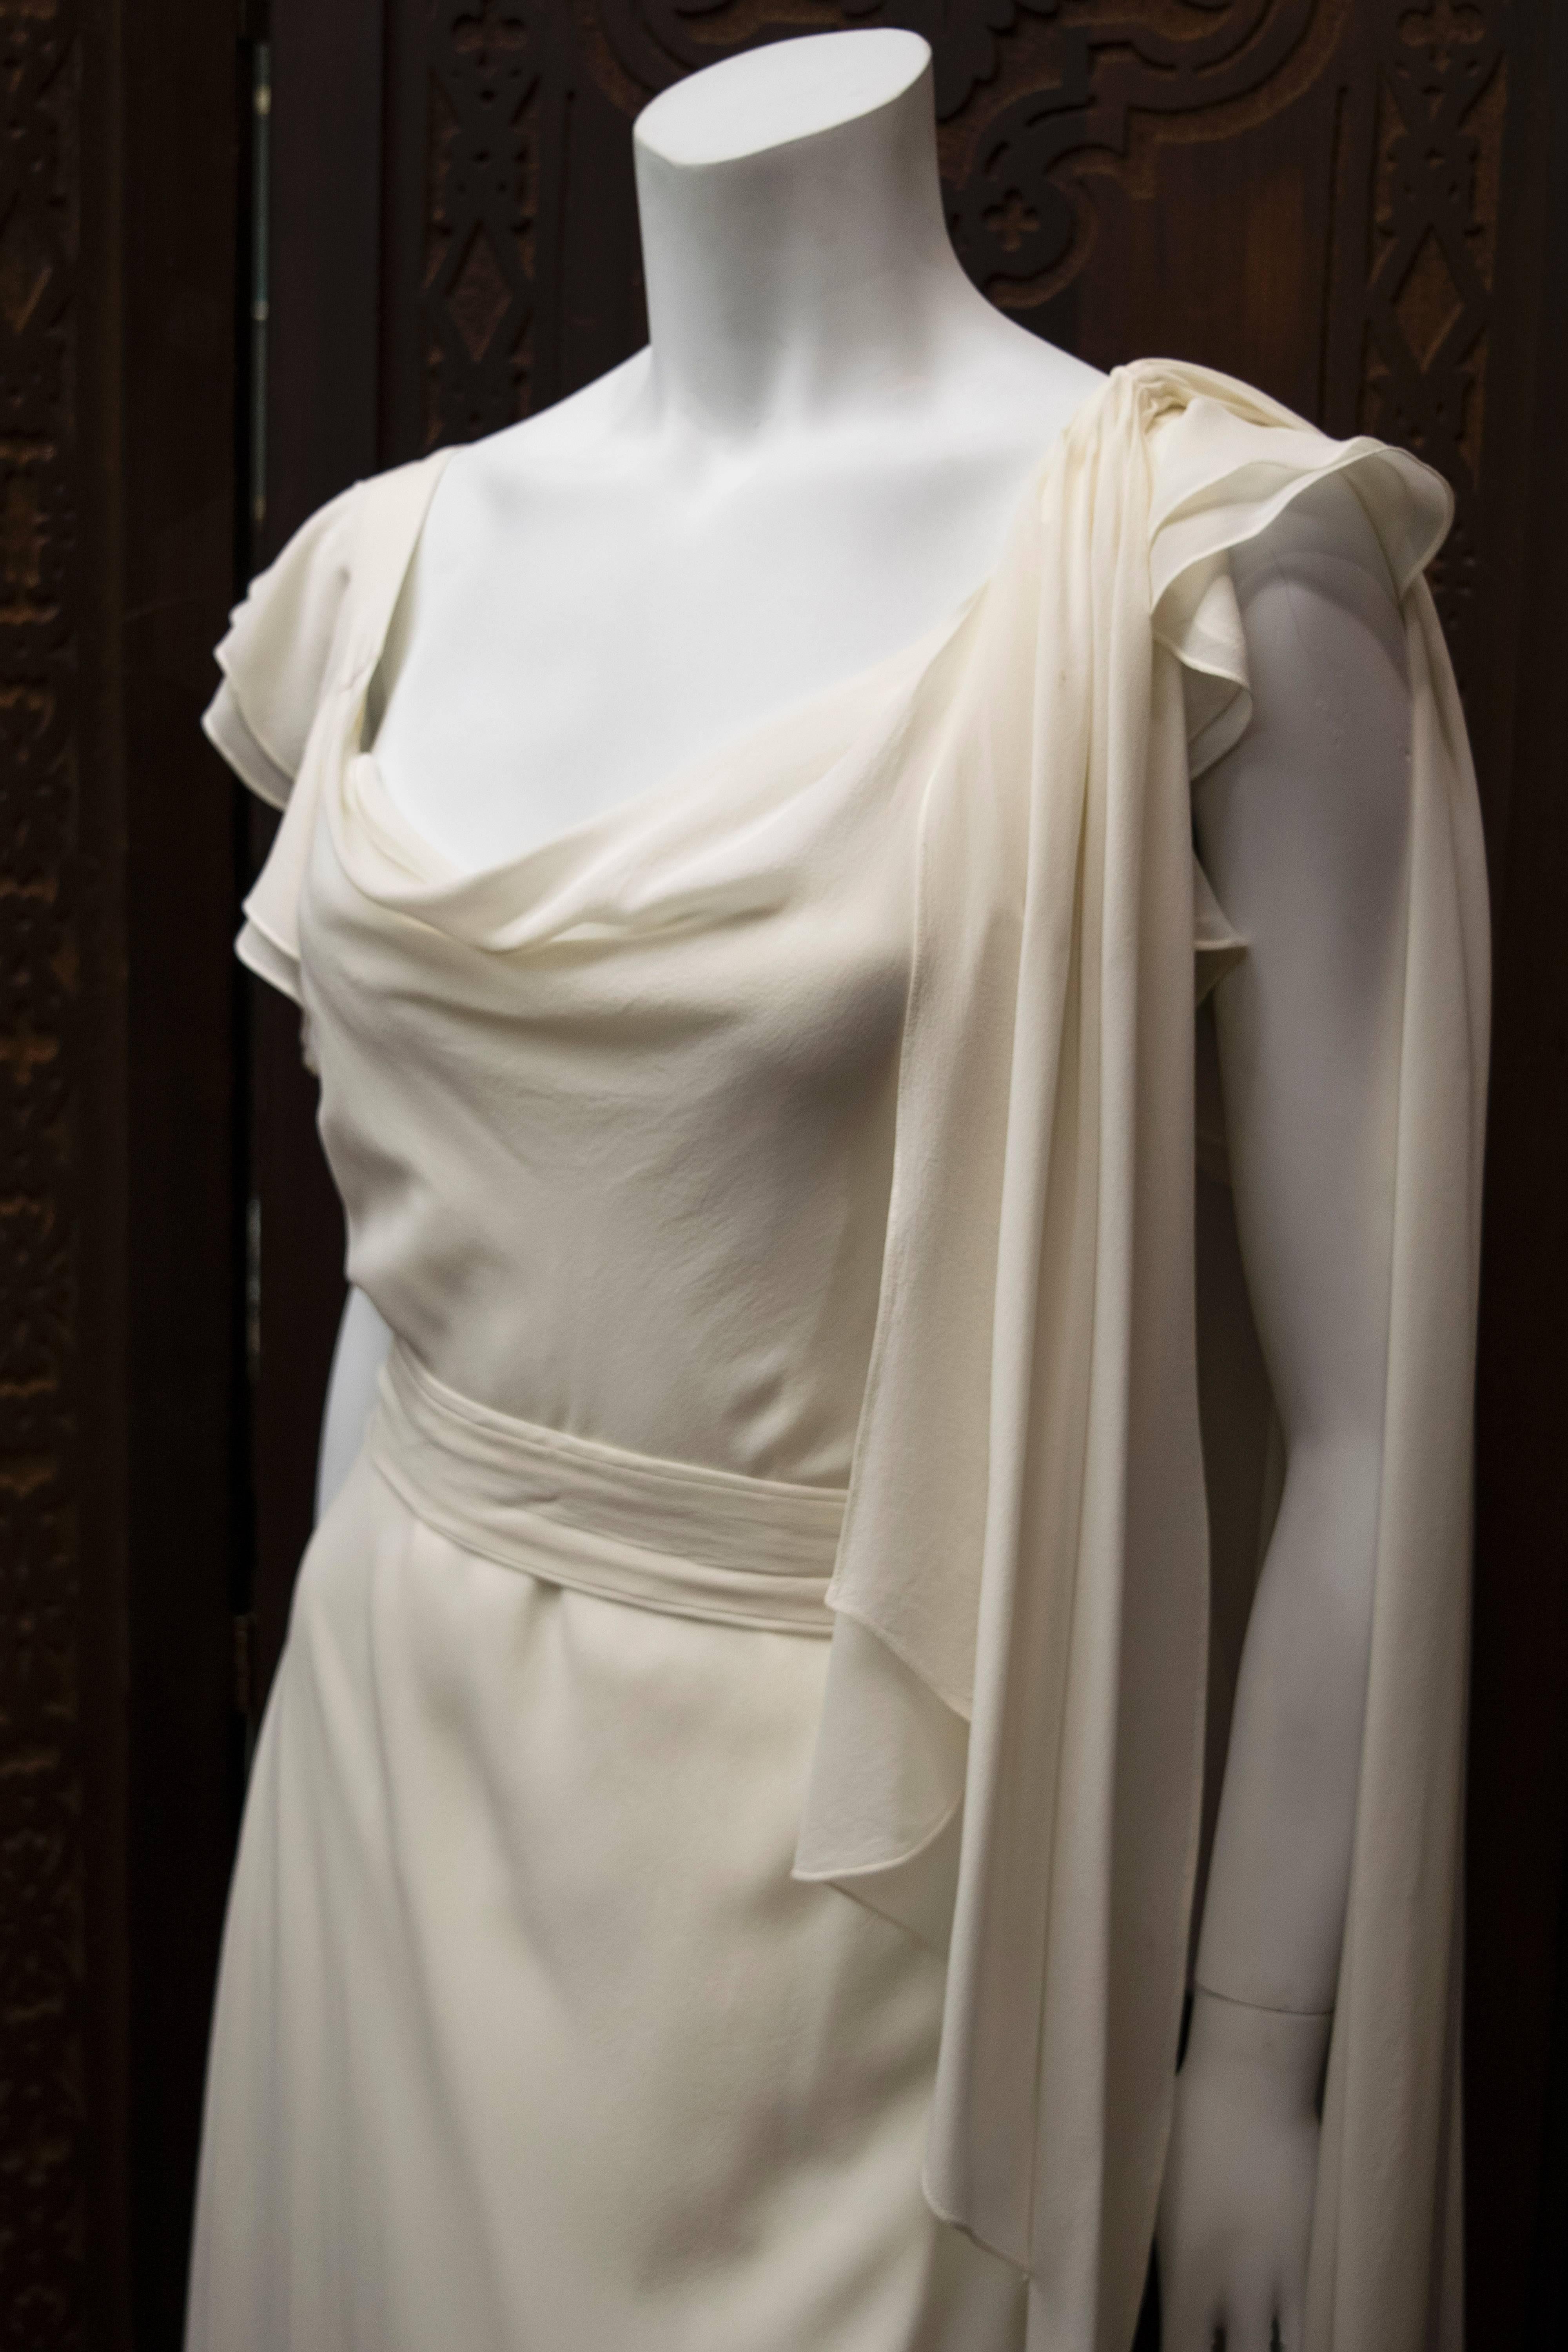 1930's Ivory Silk Chiffon Dress.
A beautifully preserved 1930s ivory silk chiffon gown. This piece is an excellent example of 1930's glamour and is pictured with original belt and sash. 

B 40
W 36
H 40
L 59